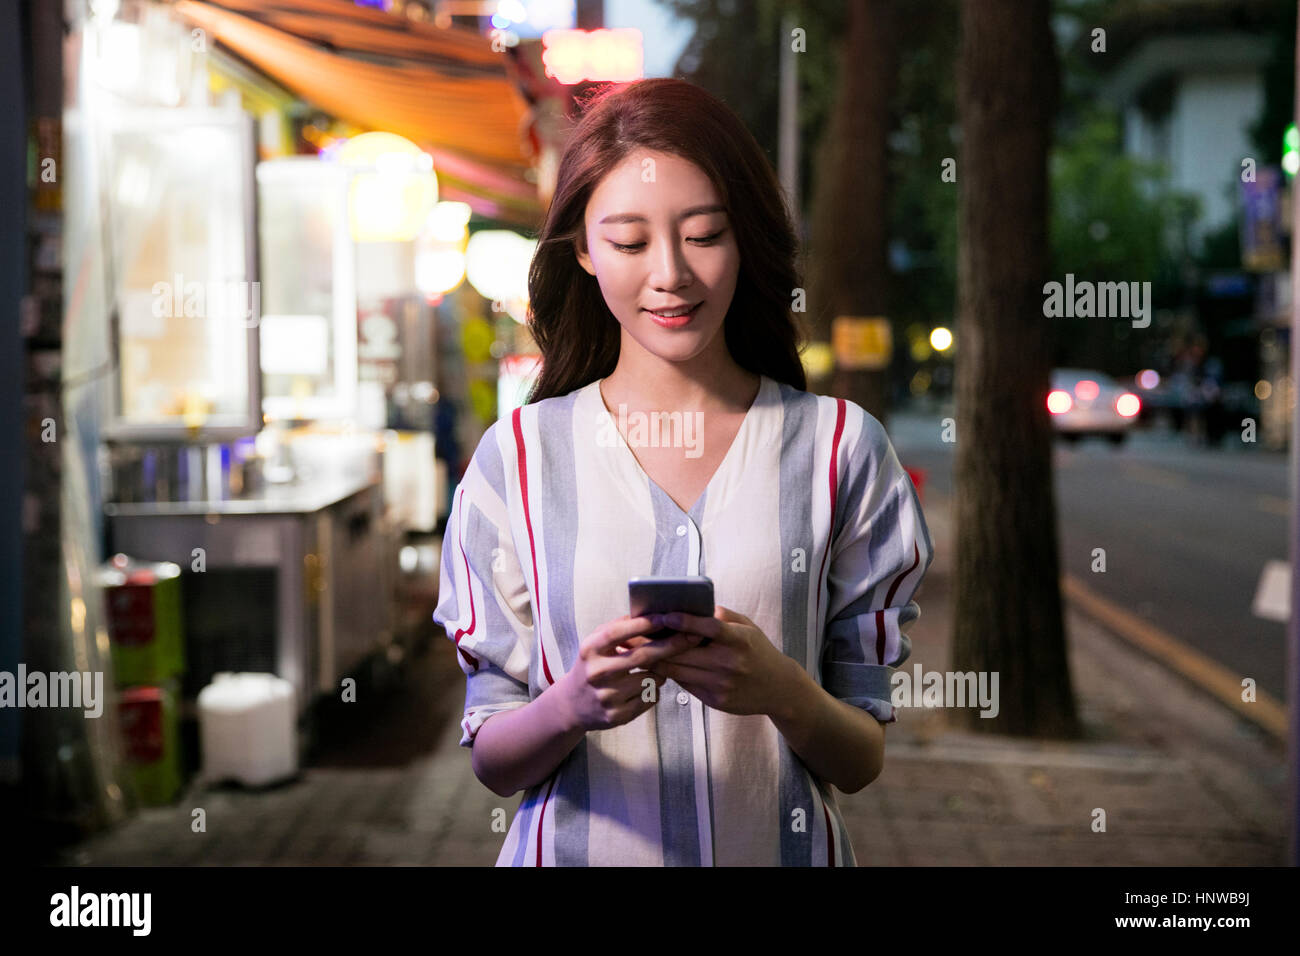 Young woman using cellphone Stock Photo